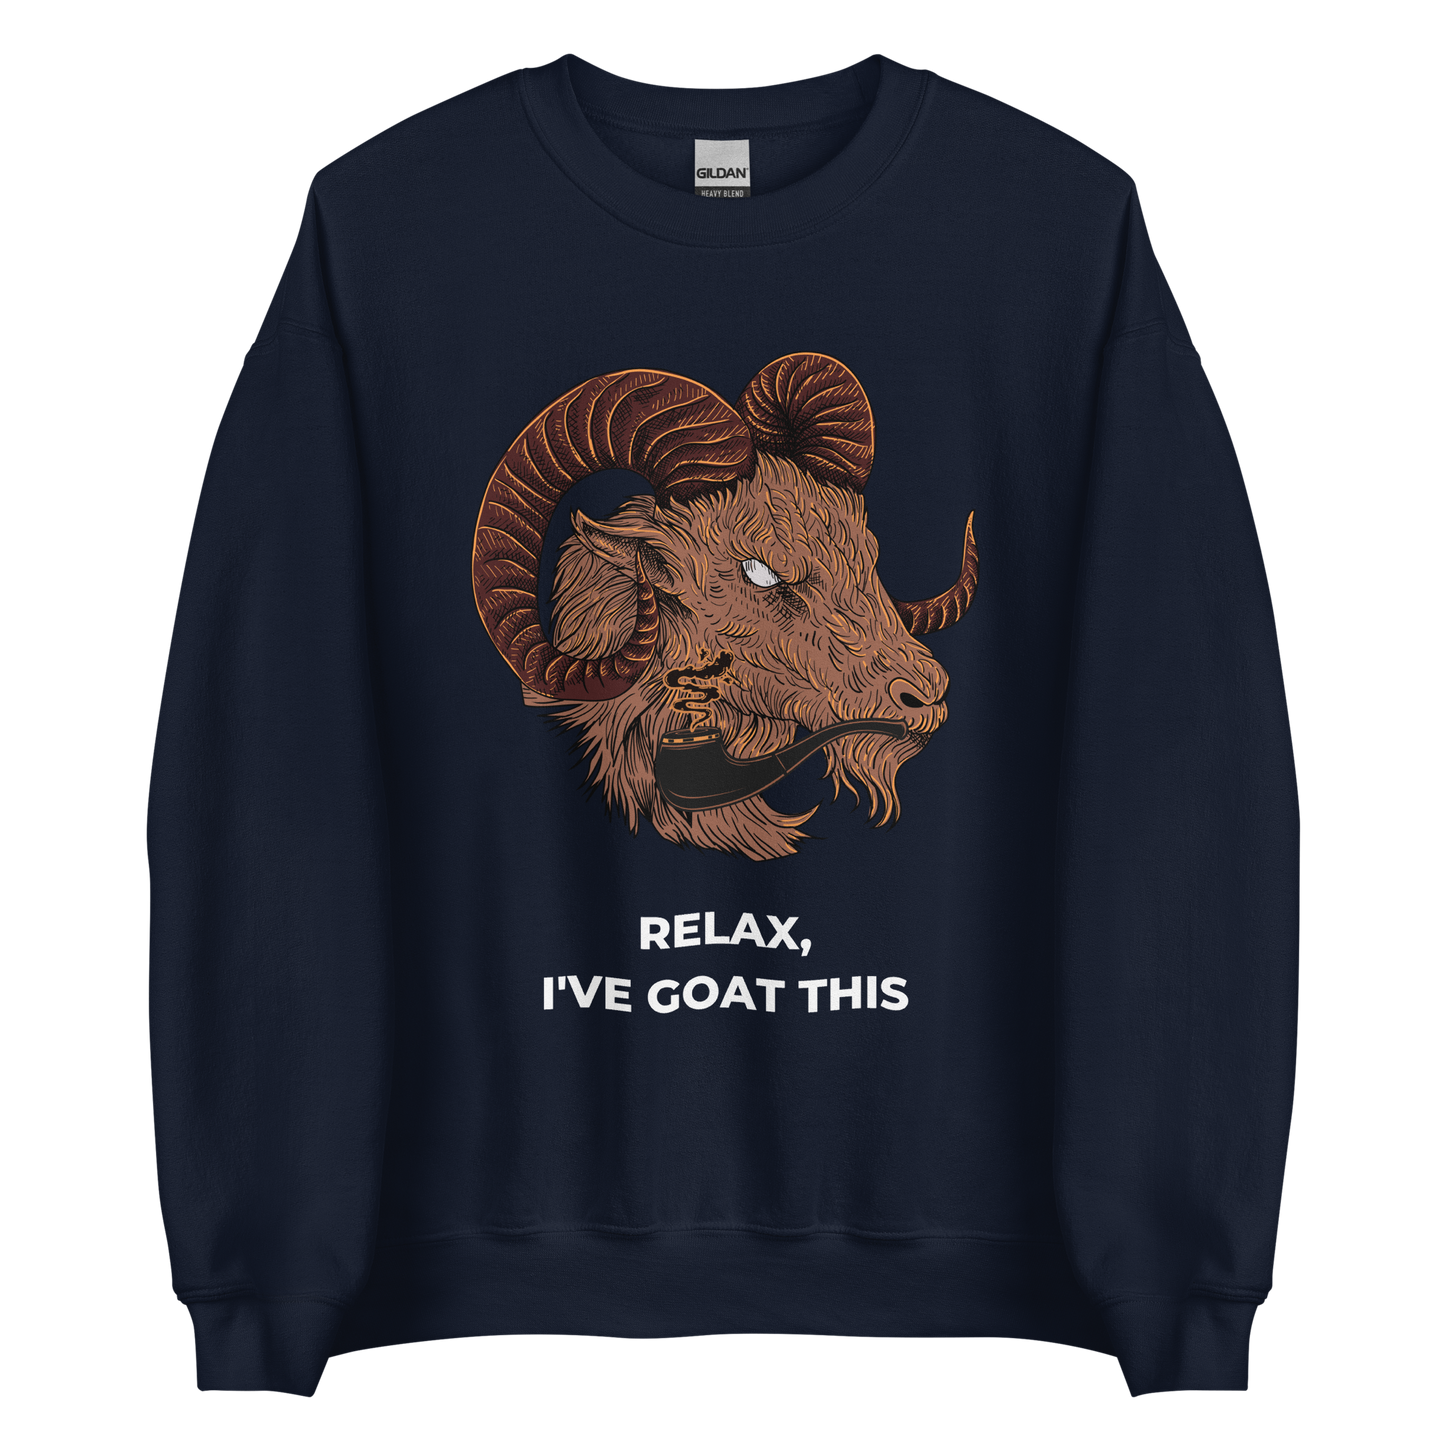 Navy Goat Sweatshirt featuring a fierce Relax I've Goat This graphic on the chest - Funny Graphic Goat Sweatshirts - Boozy Fox